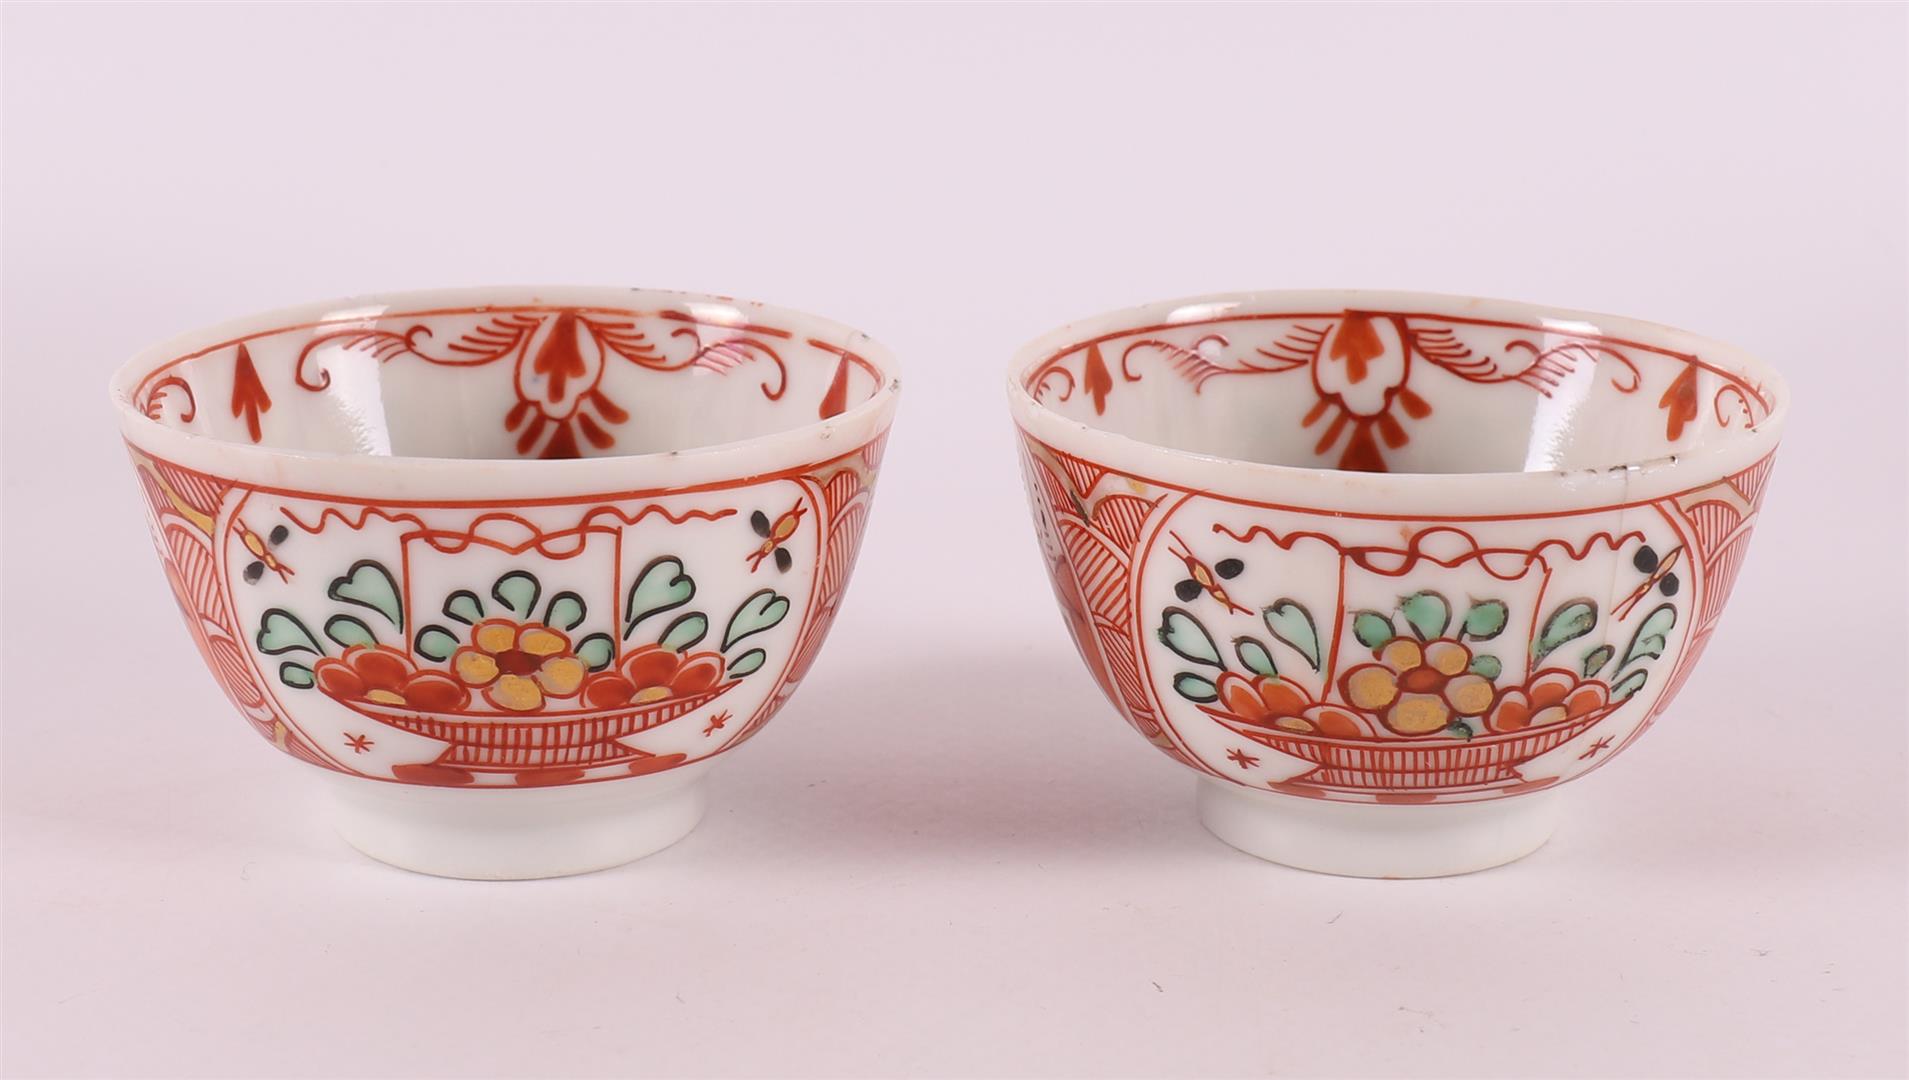 An Amsterdam colorful porcelain bowl, China, Qianglong, 18th century. Polychrome decoration of - Image 16 of 20